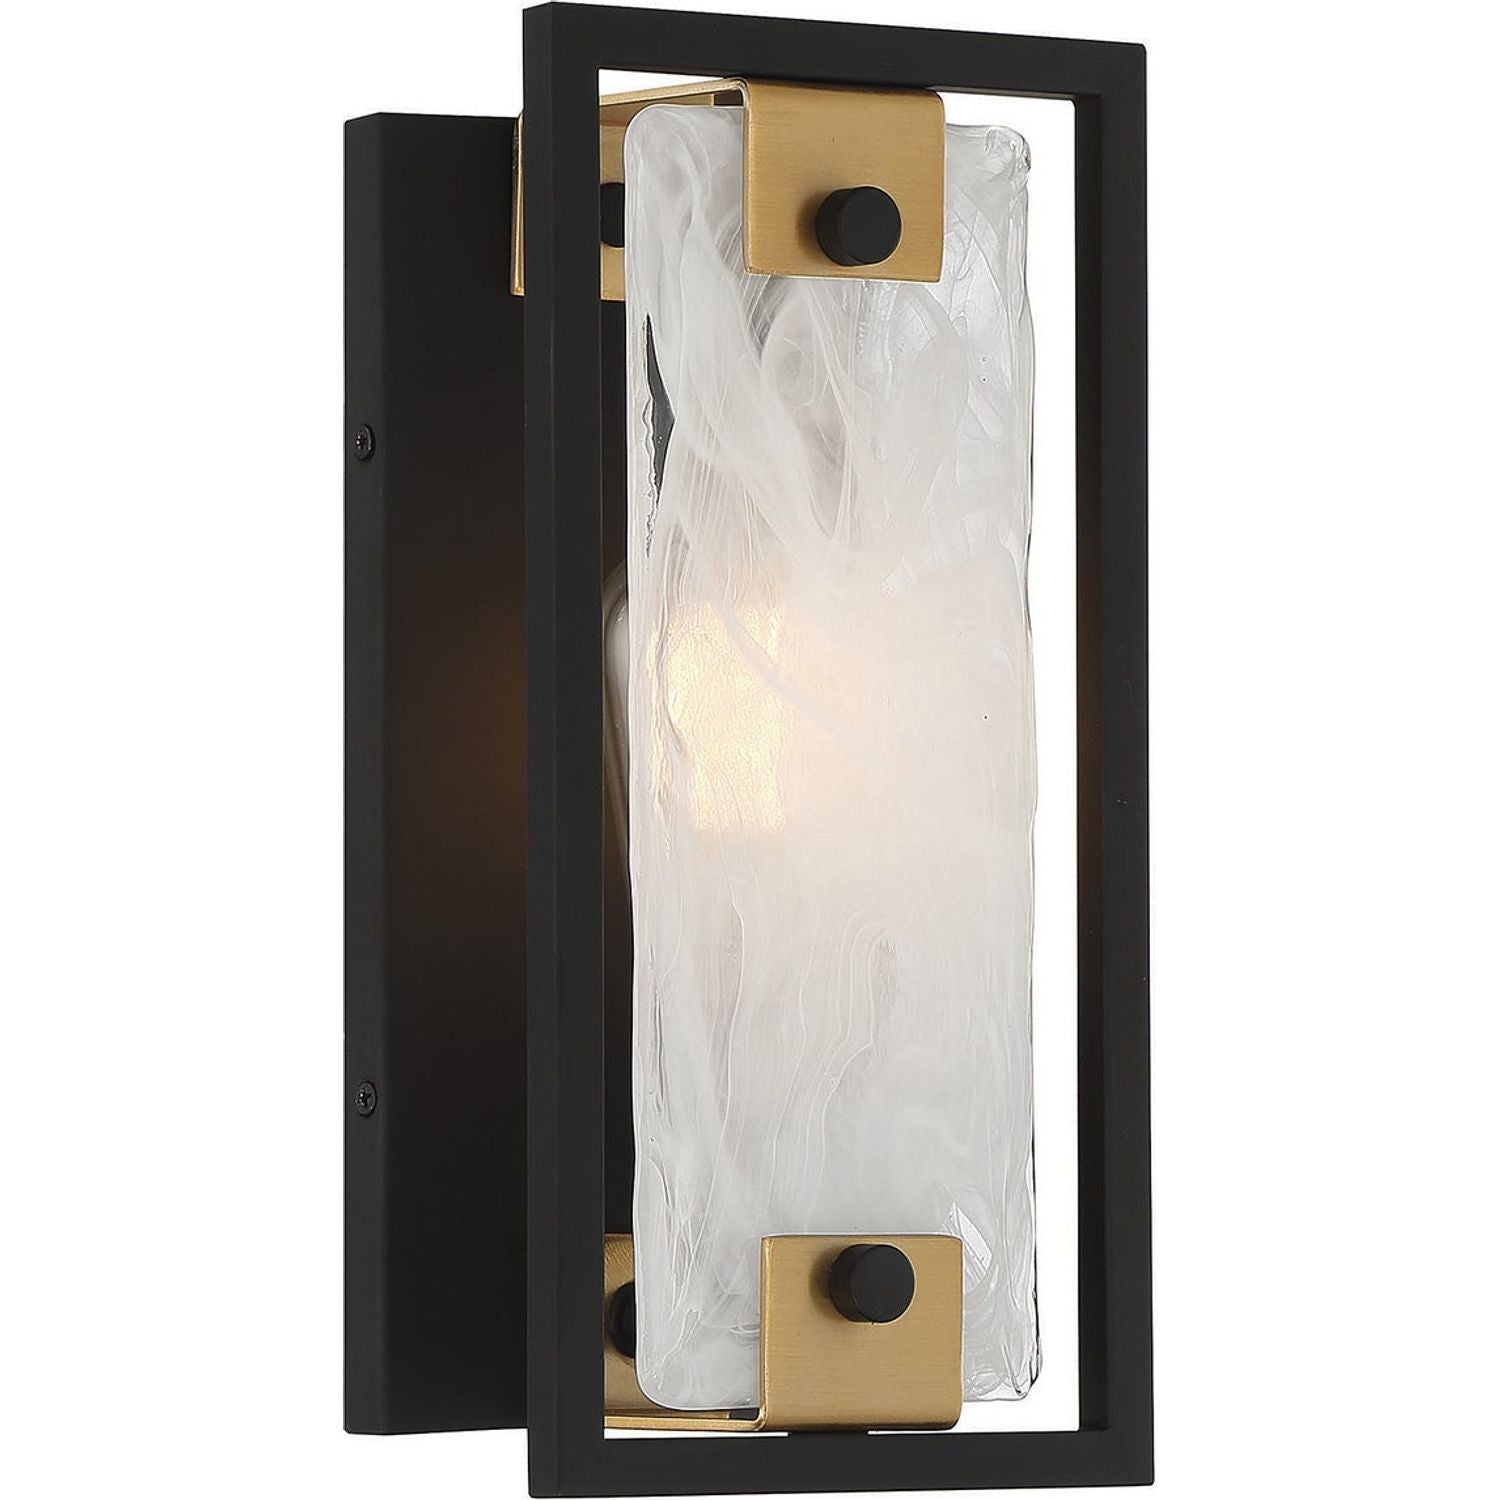 Savoy House - 9-1697-1-143 - One Light Wall Sconce - Hayward - Matte Black with Warm Brass Accents